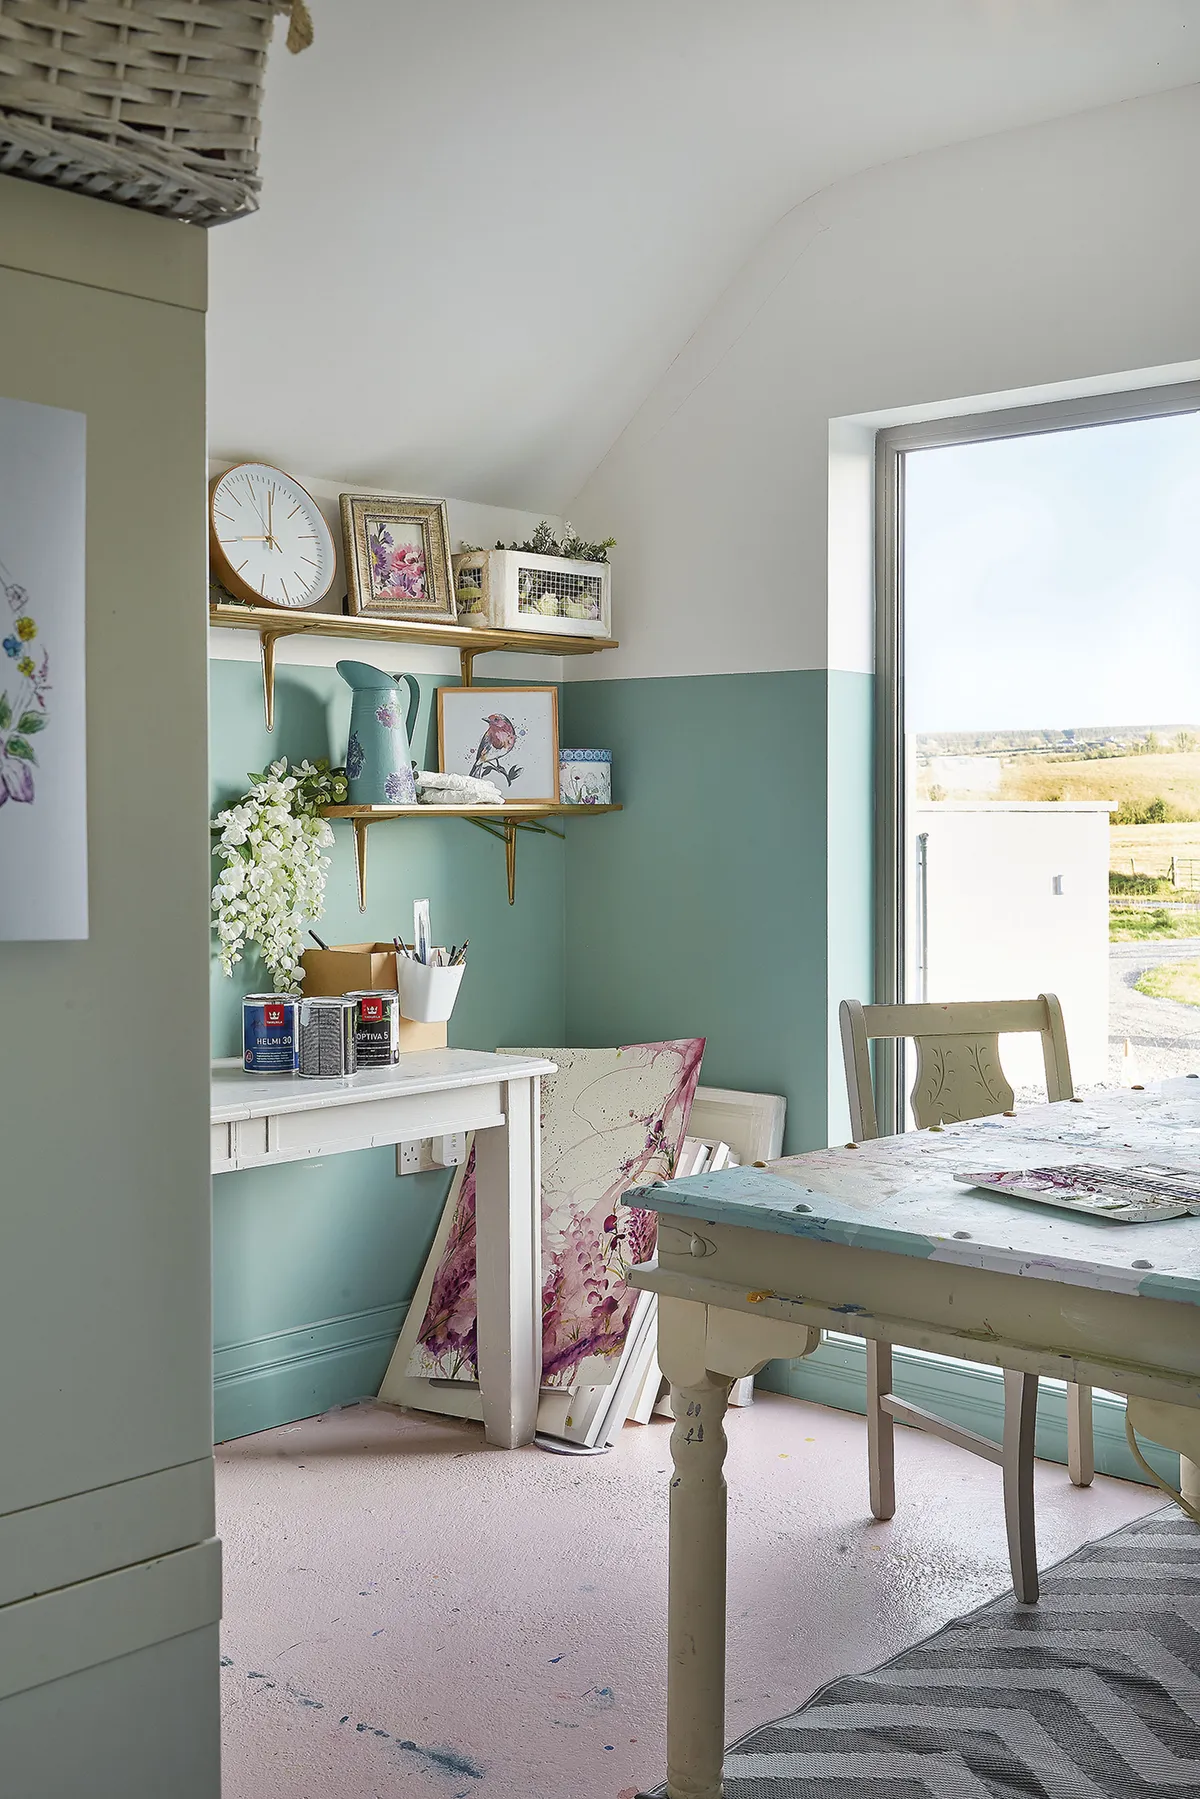 Gillian has painted three-quarters of the wall mint and the rest white to draw the eye upwards for an airy, spacious feel, accentuating the natural light